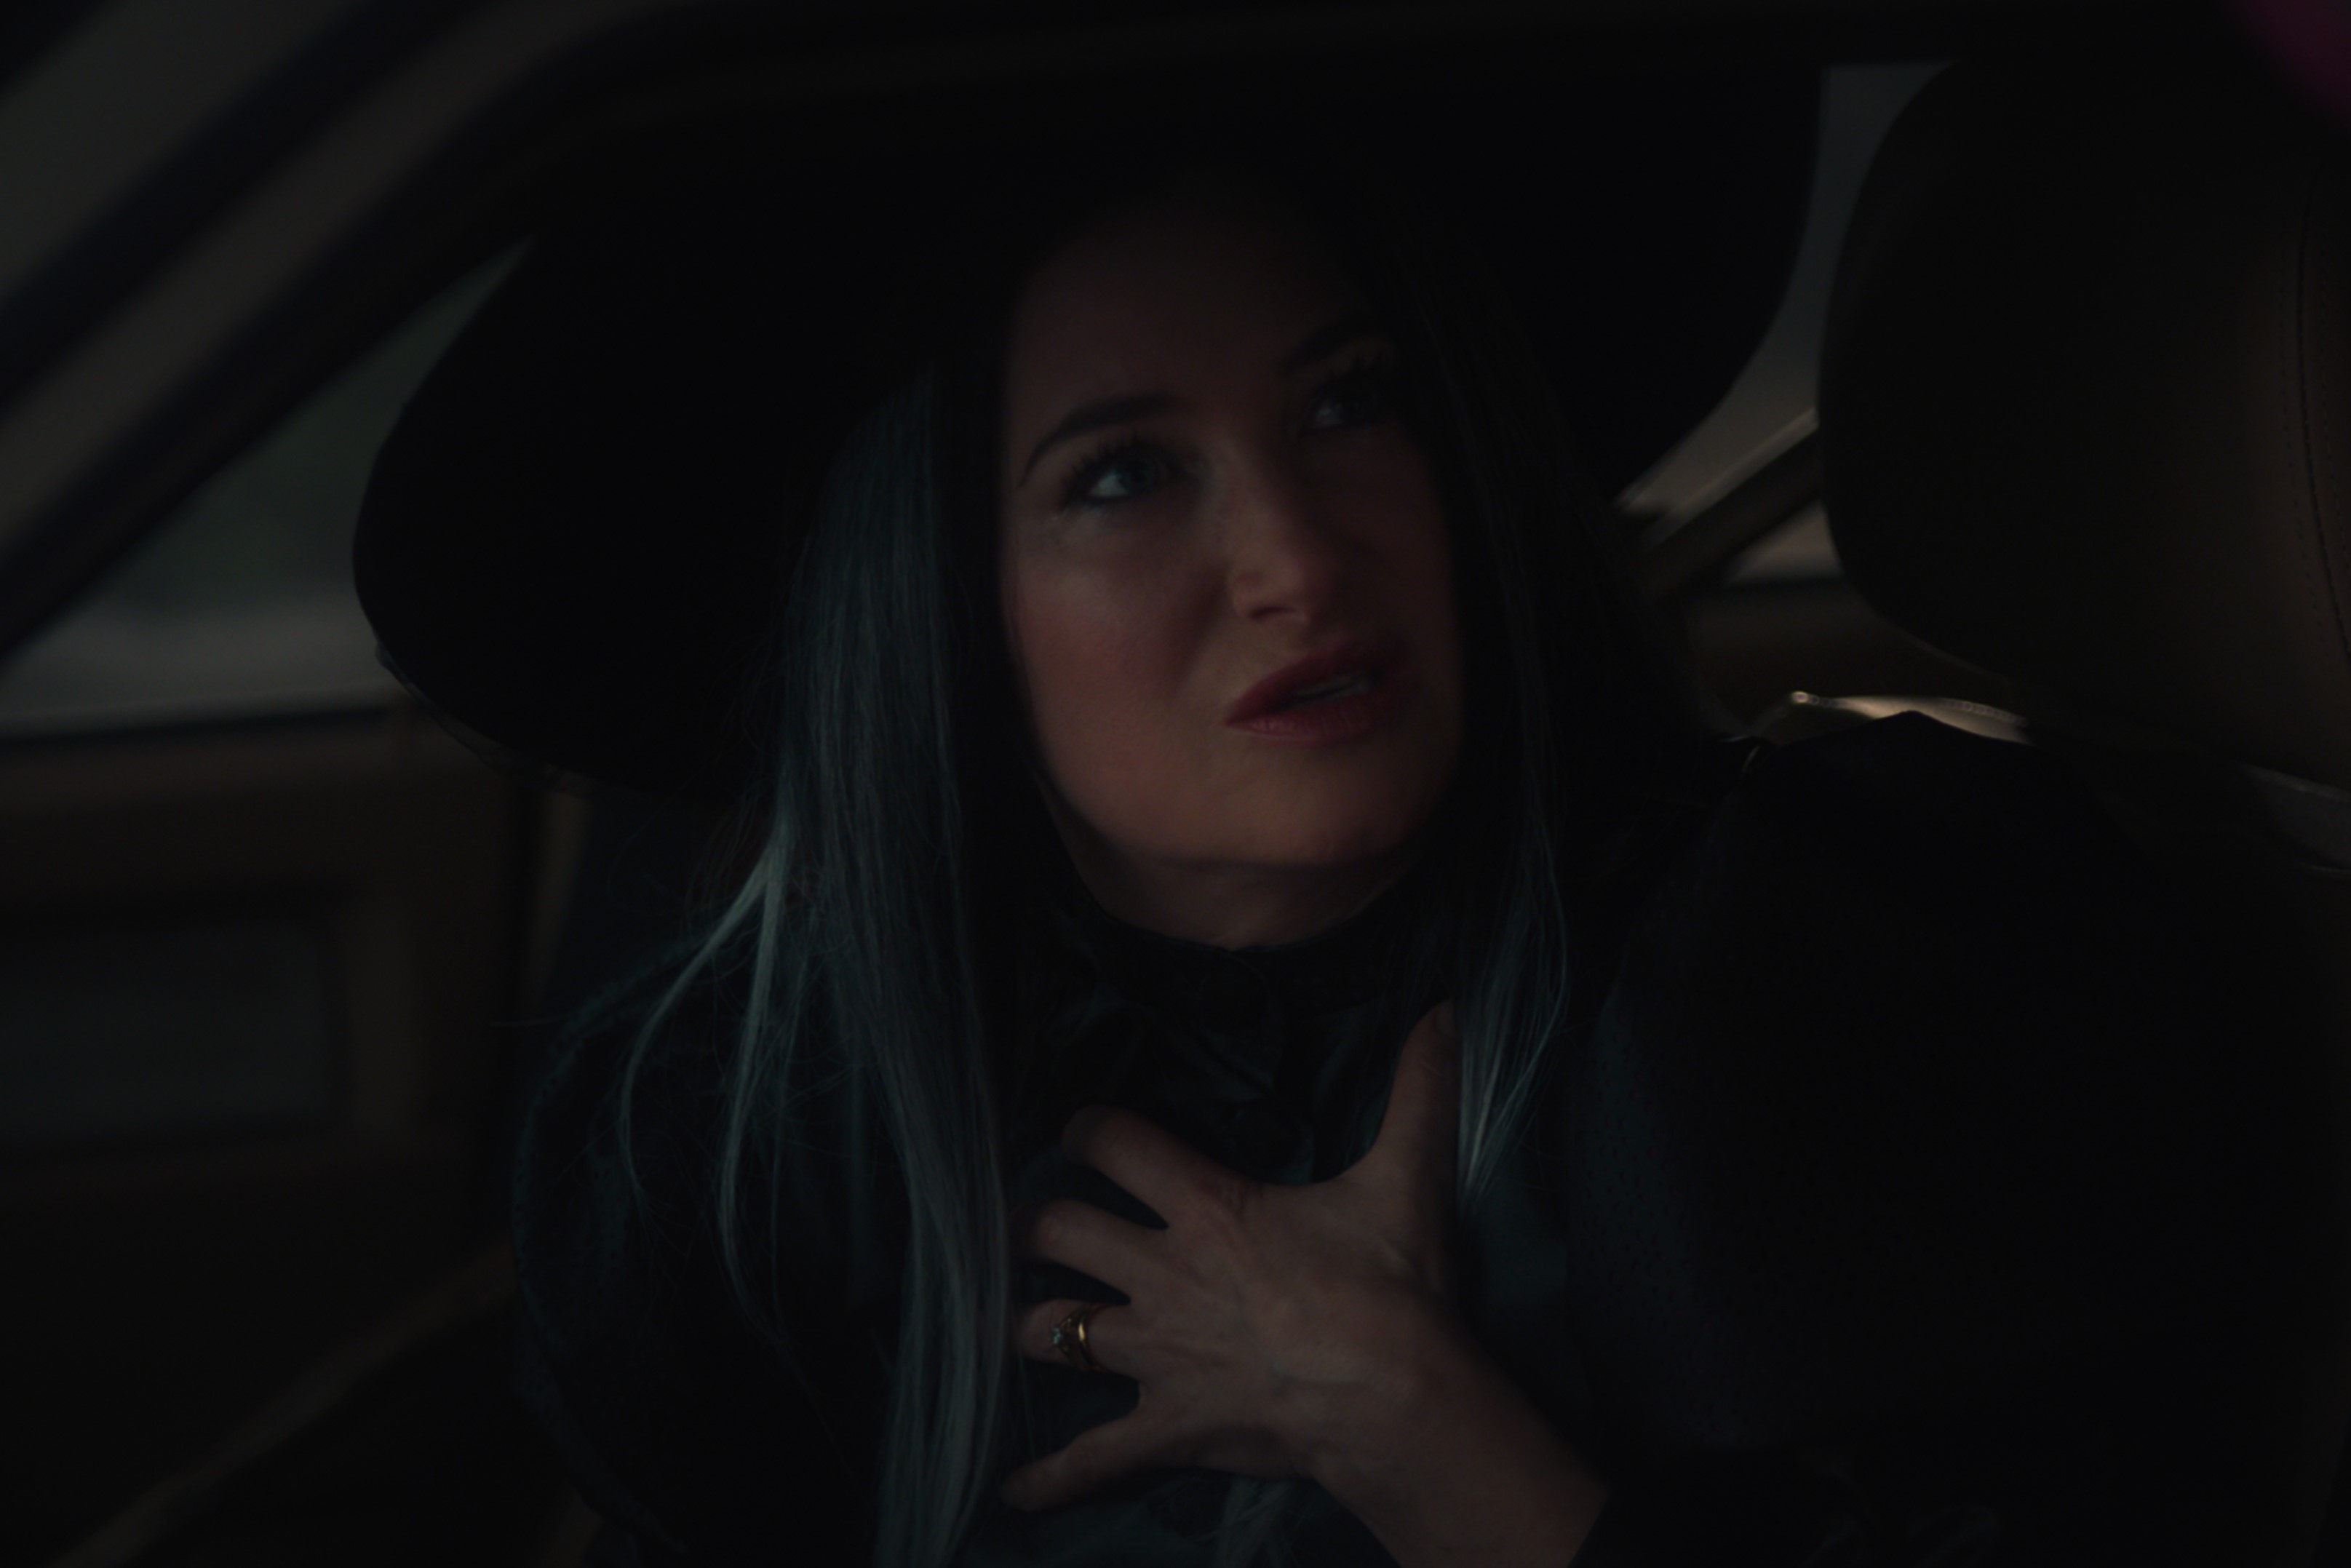 'WandaVision' actor Kathryn Hahn, as her character Agatha Harkness, wears a witch hat and puts her hand over her chest.